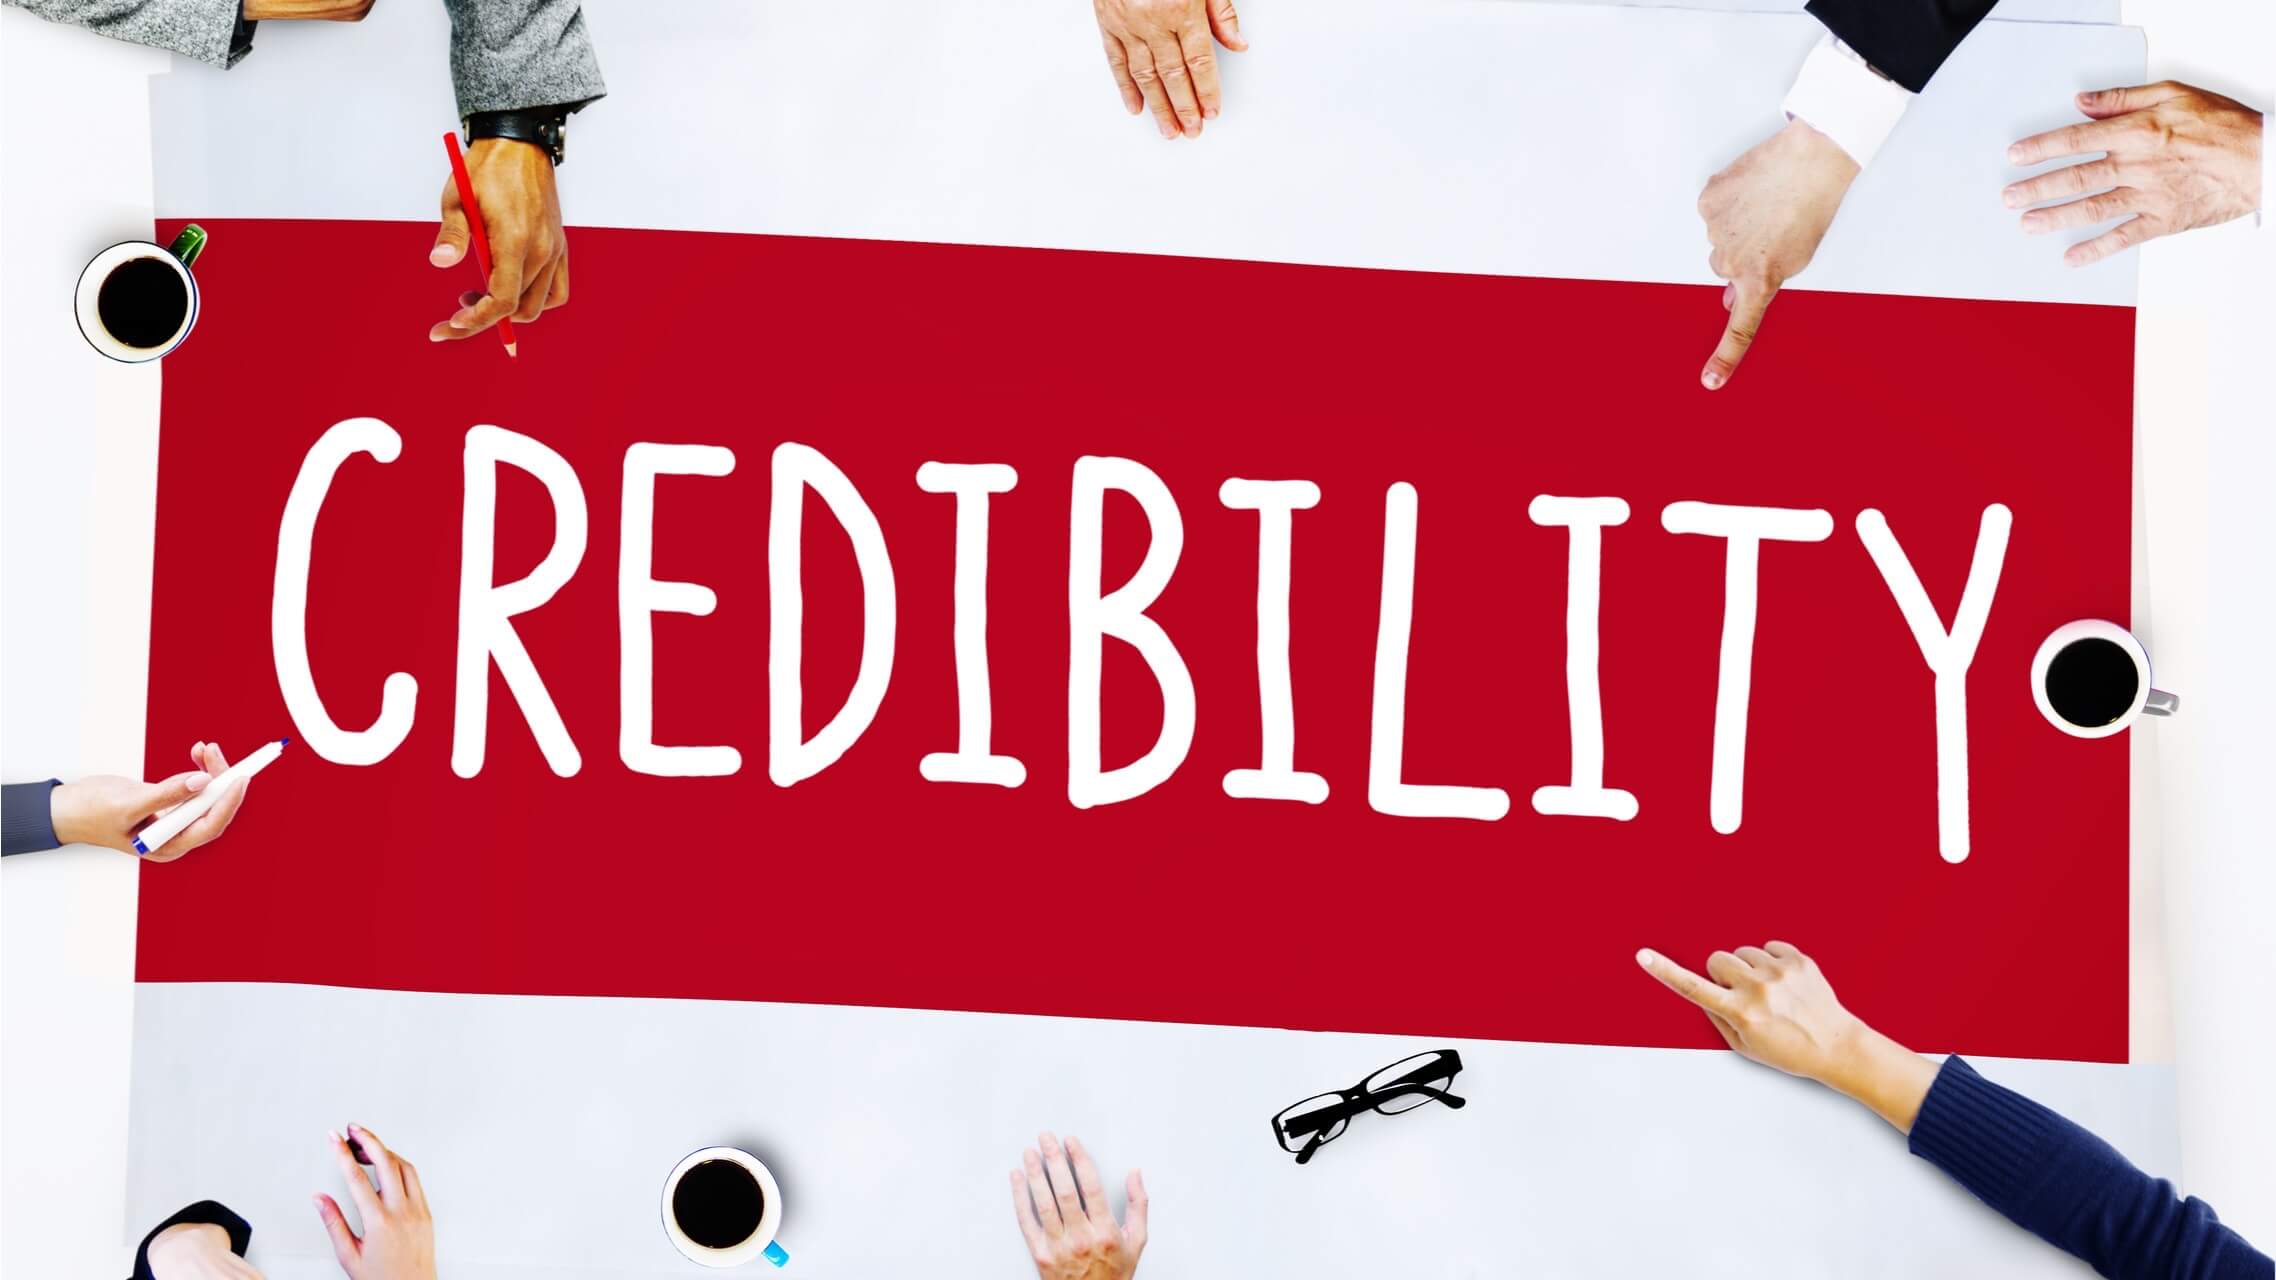 The importance of credibility